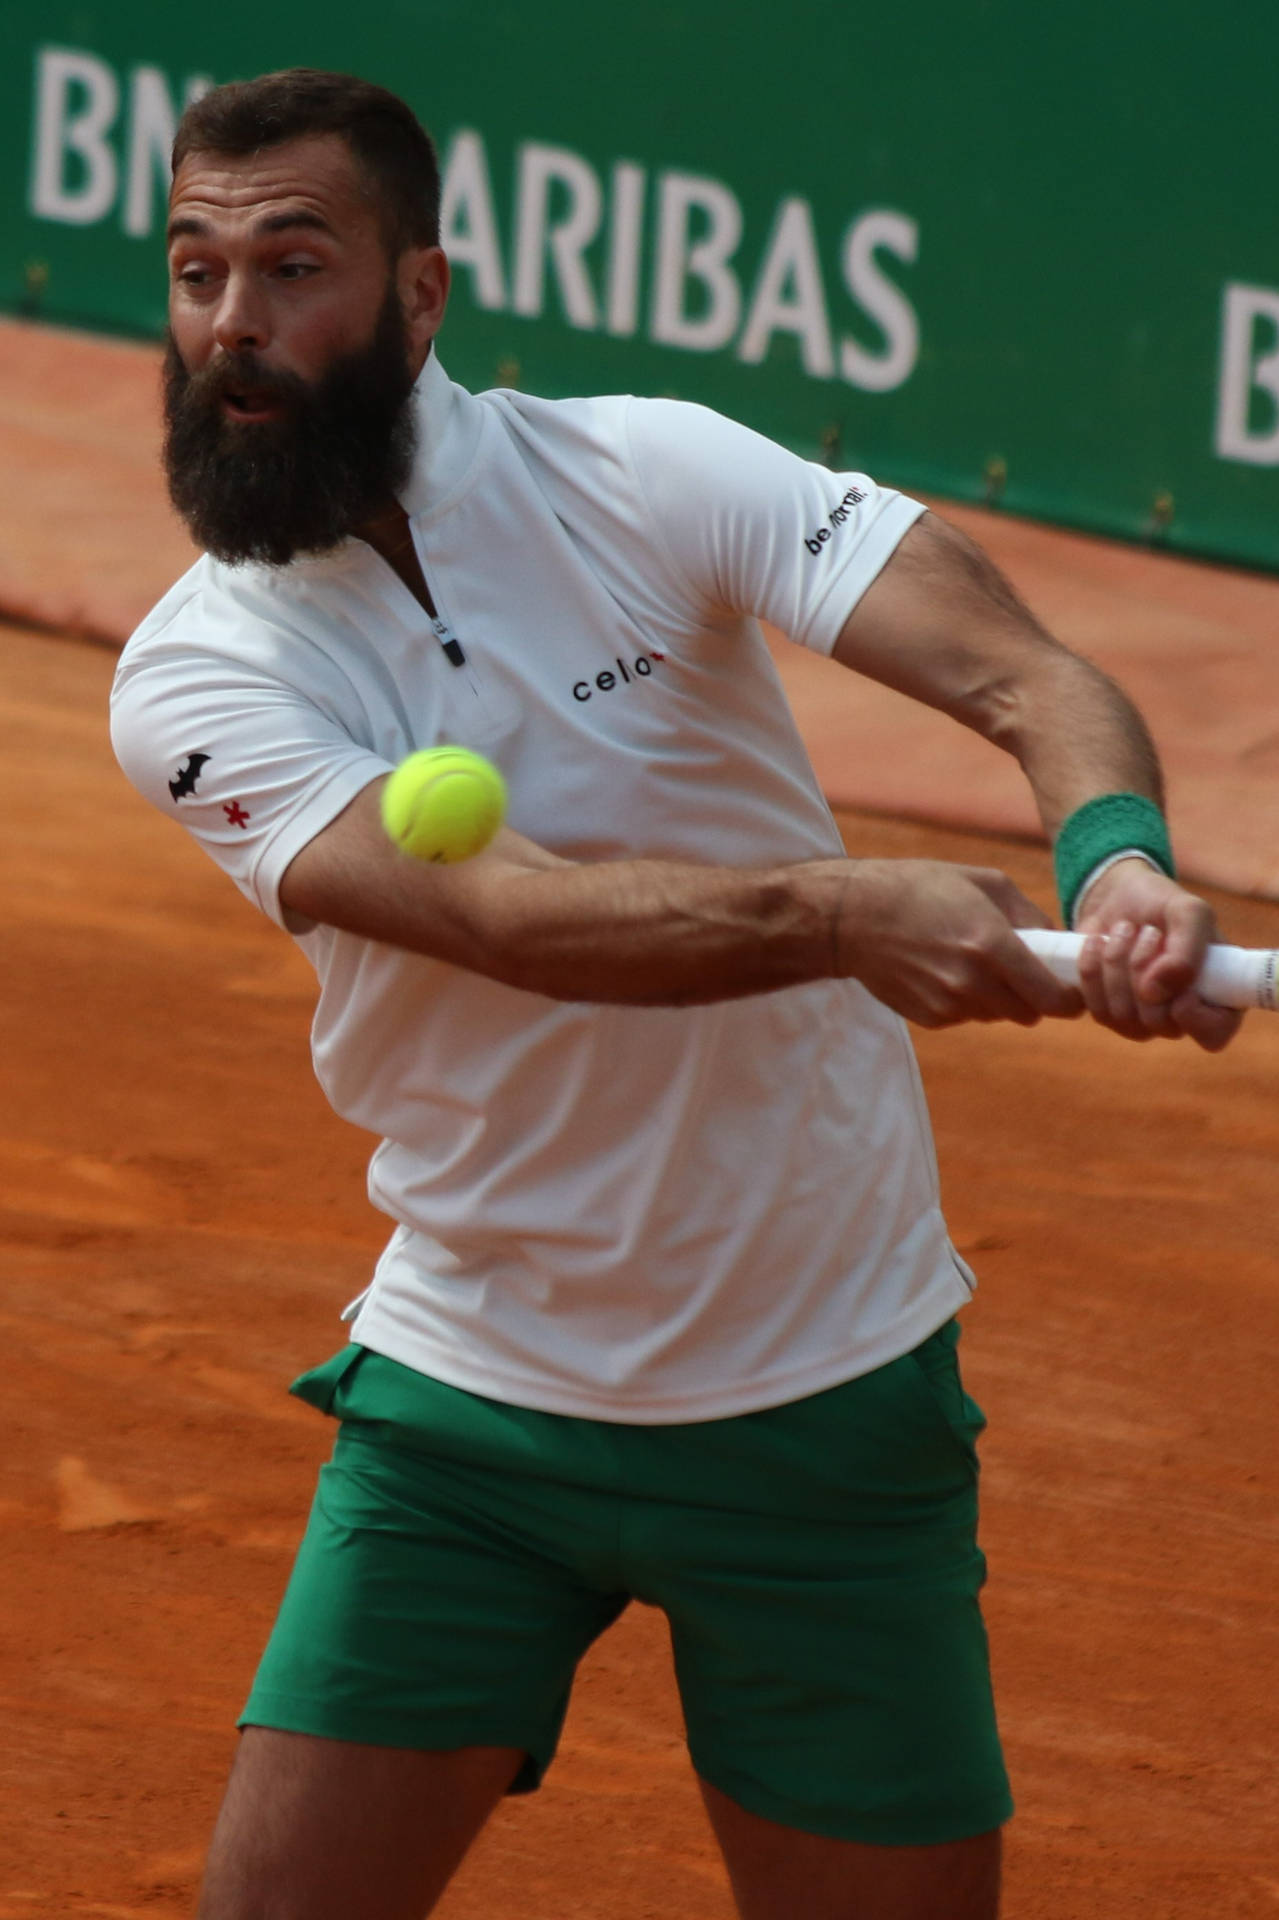 Professional Tennis Player Benoit Paire in Action Wallpaper